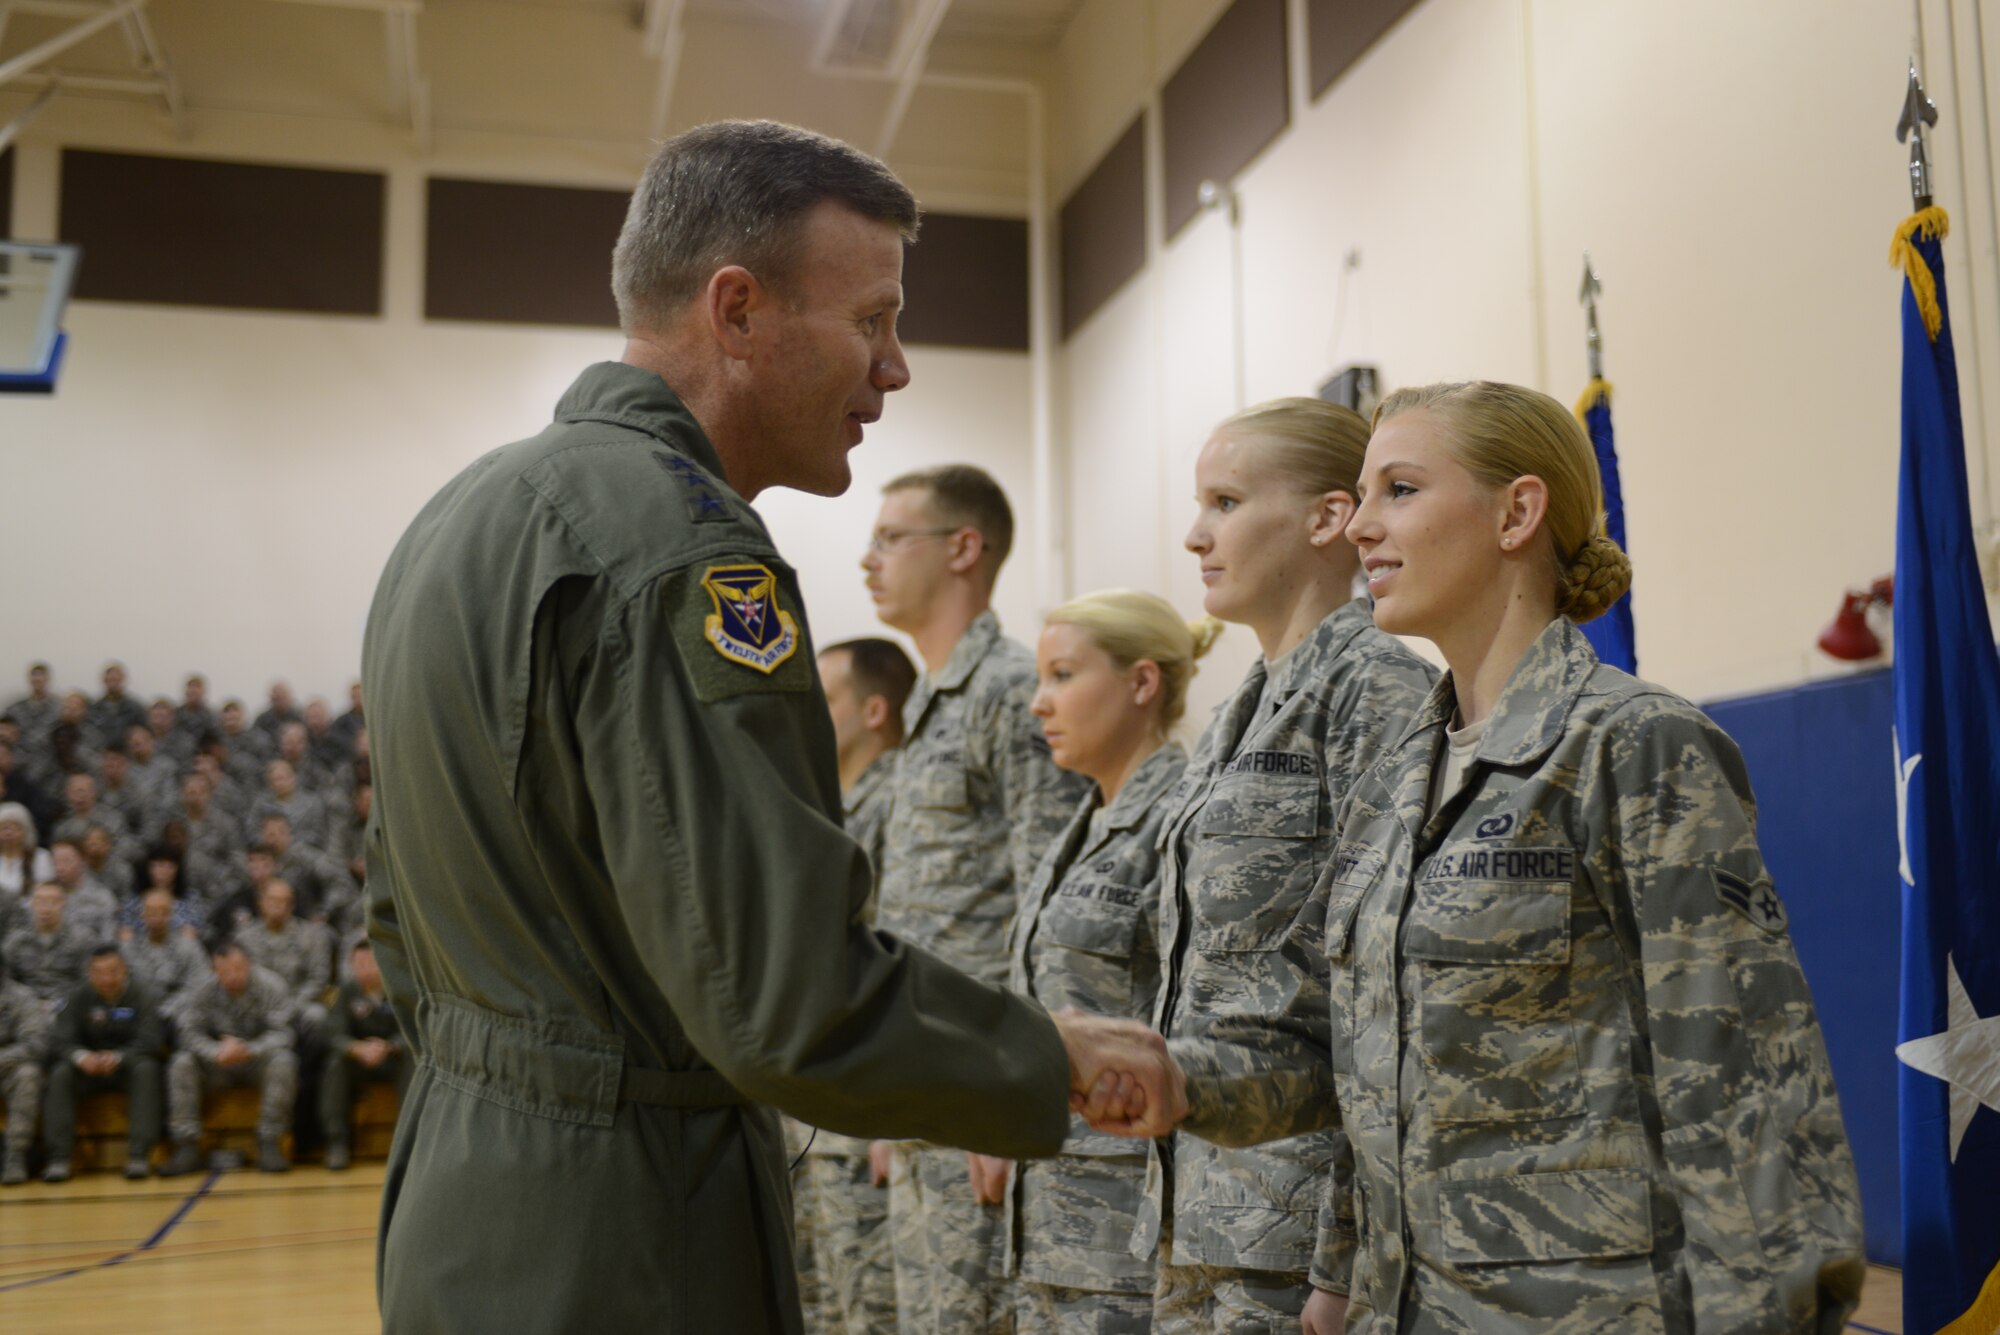 U.S. Air Force Lt. Gen. Tod Wolters, 12th Air Force (Air Forces Southern) commander, shakes hands with Airman 1st Class Gabrielle Swift, 366th Operations Support Squadron airfield management operations coordinator, Nov. 20, 2013, at Mountain Home Air Force Base, Idaho. General Wolters coined Swift for preventing a potential sexual assault at a Boise State University football game in October. (U.S. Air Force photo by Senior Airman Benjamin Sutton/Released)